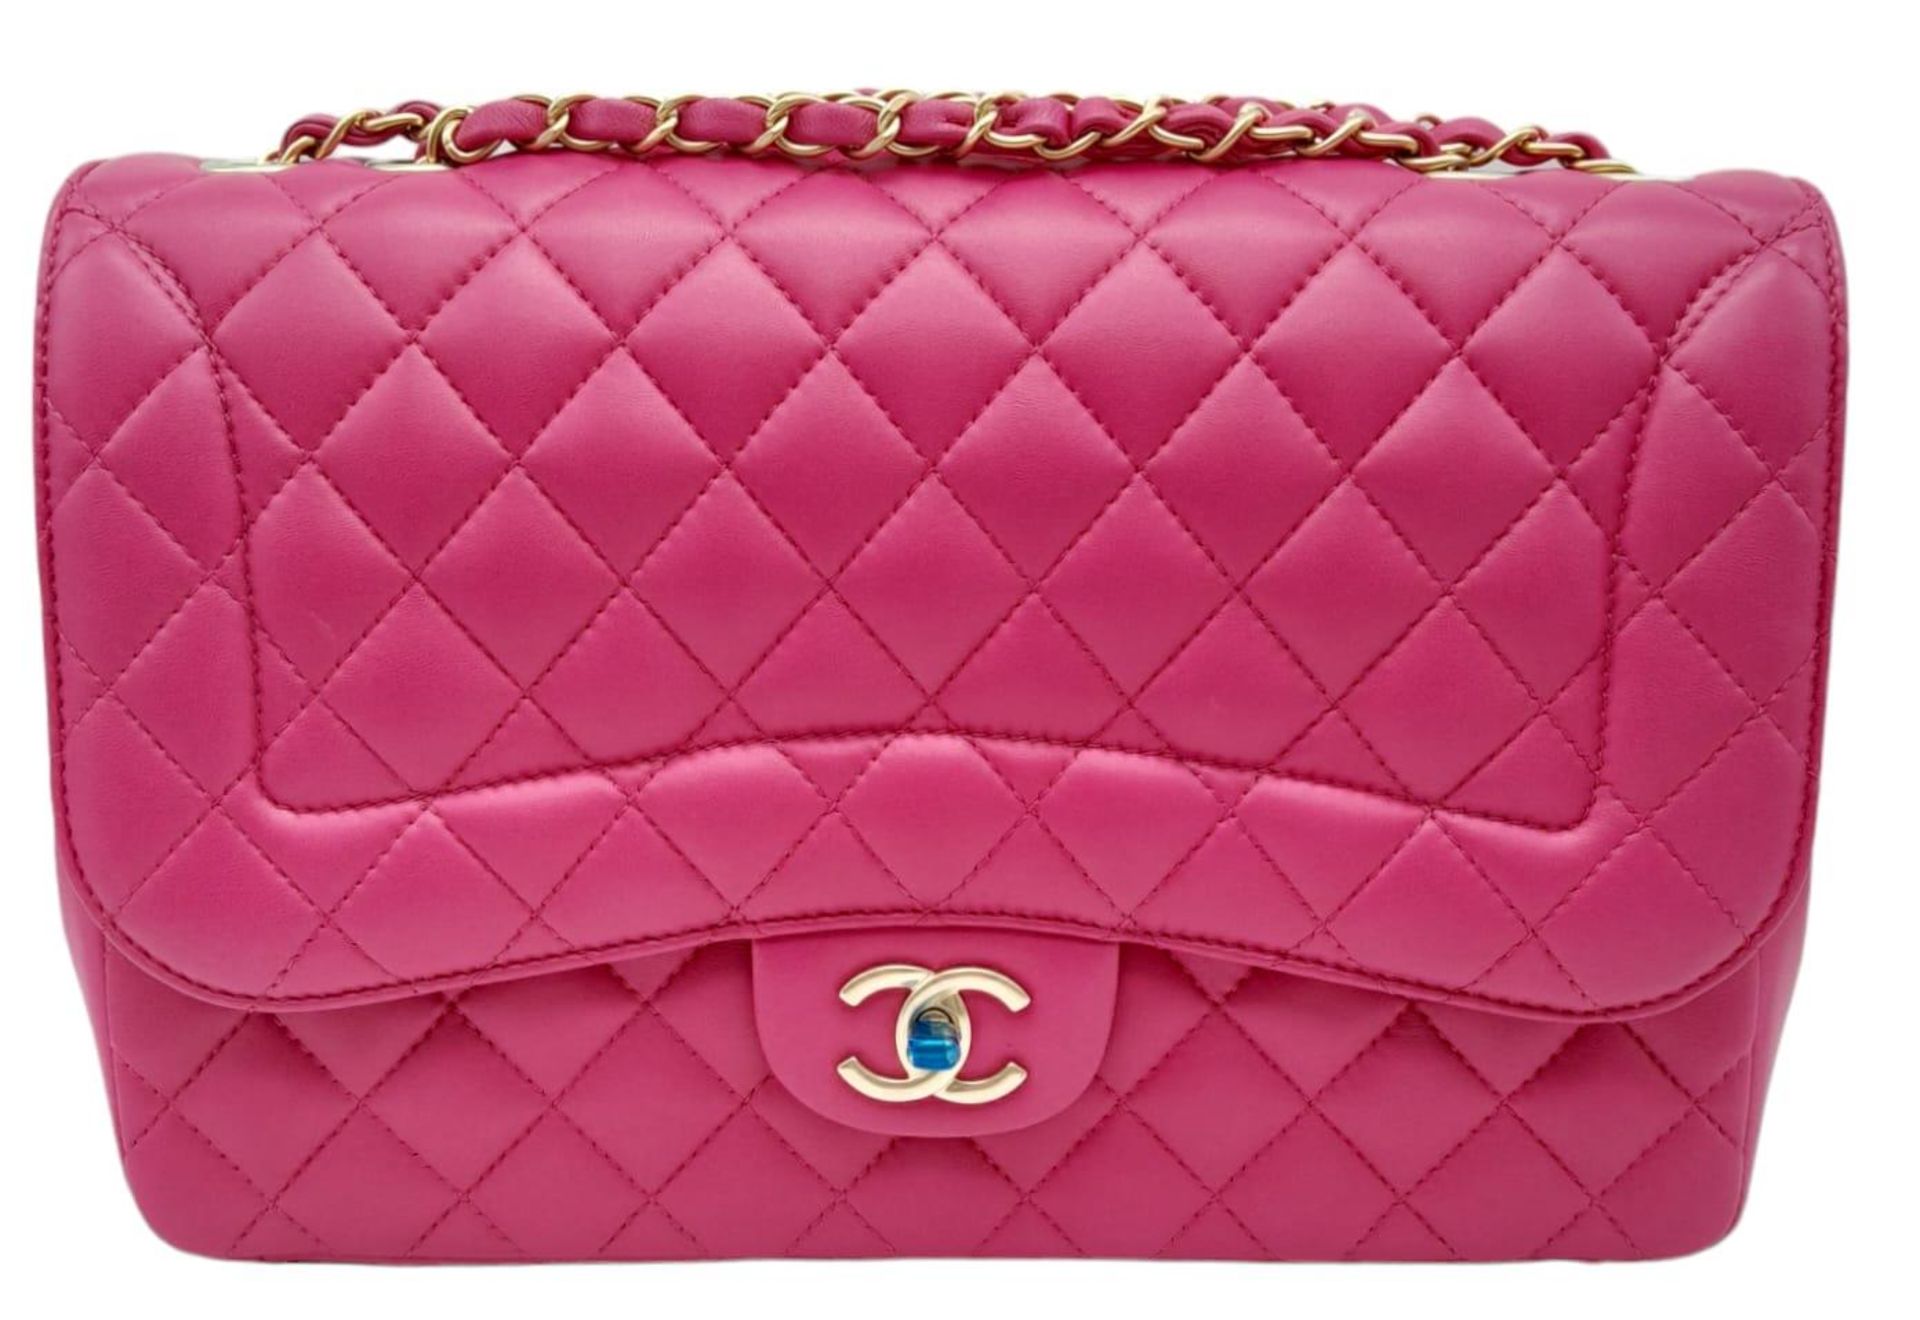 Chanel Mademoiselle Chic Flap Bag. Beautiful deep pink quilted lambskin leather with diamond